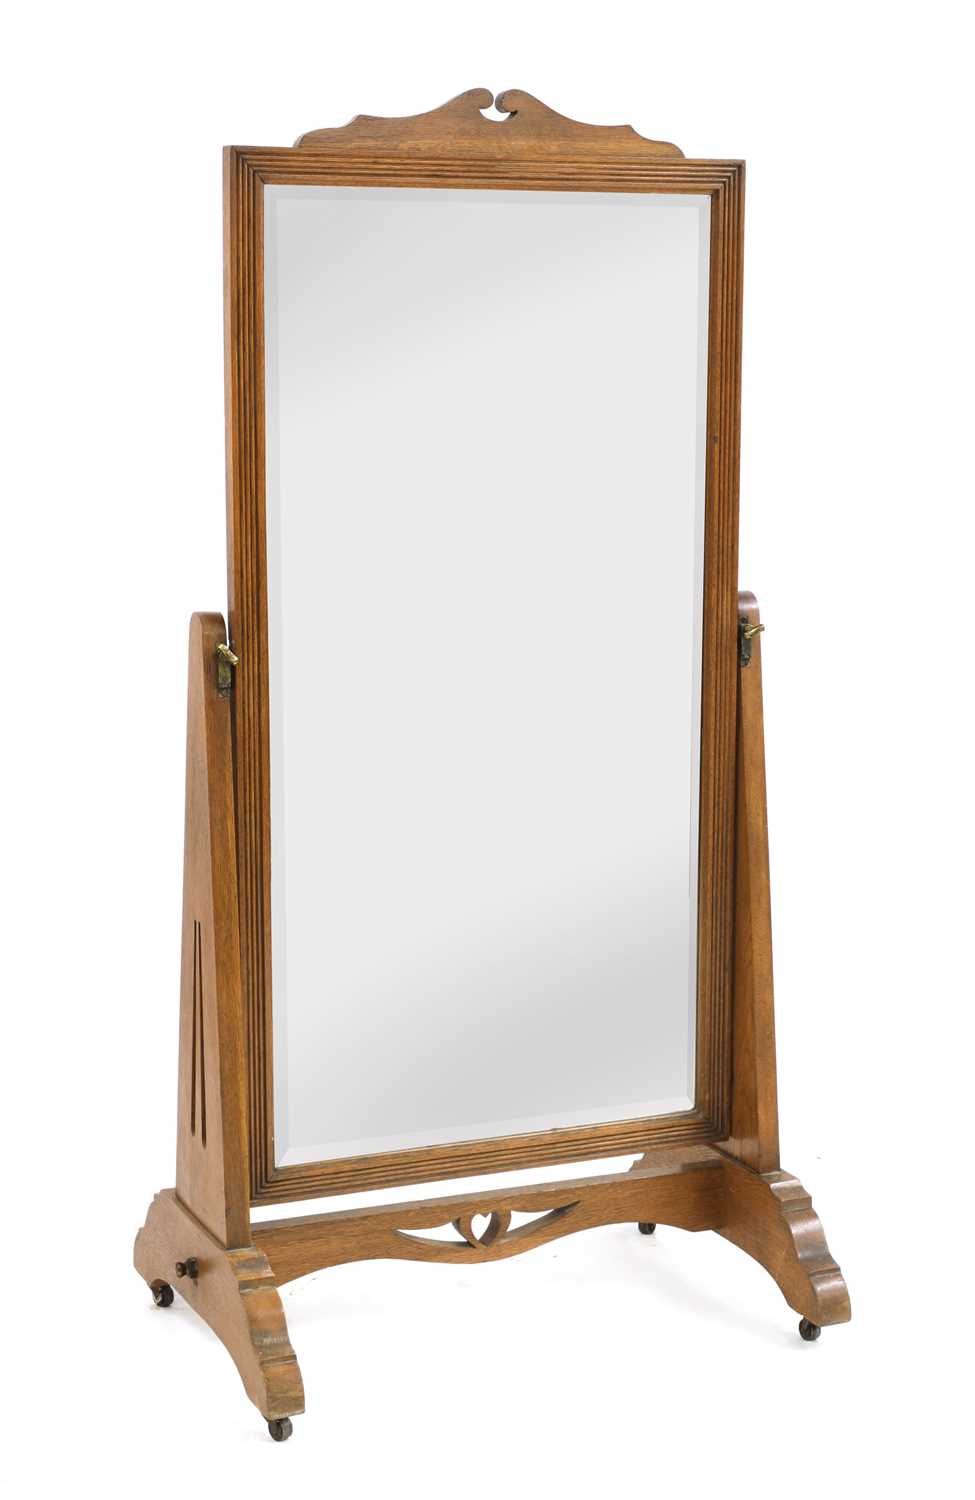 Lot 56 - An Arts and Crafts oak cheval mirror